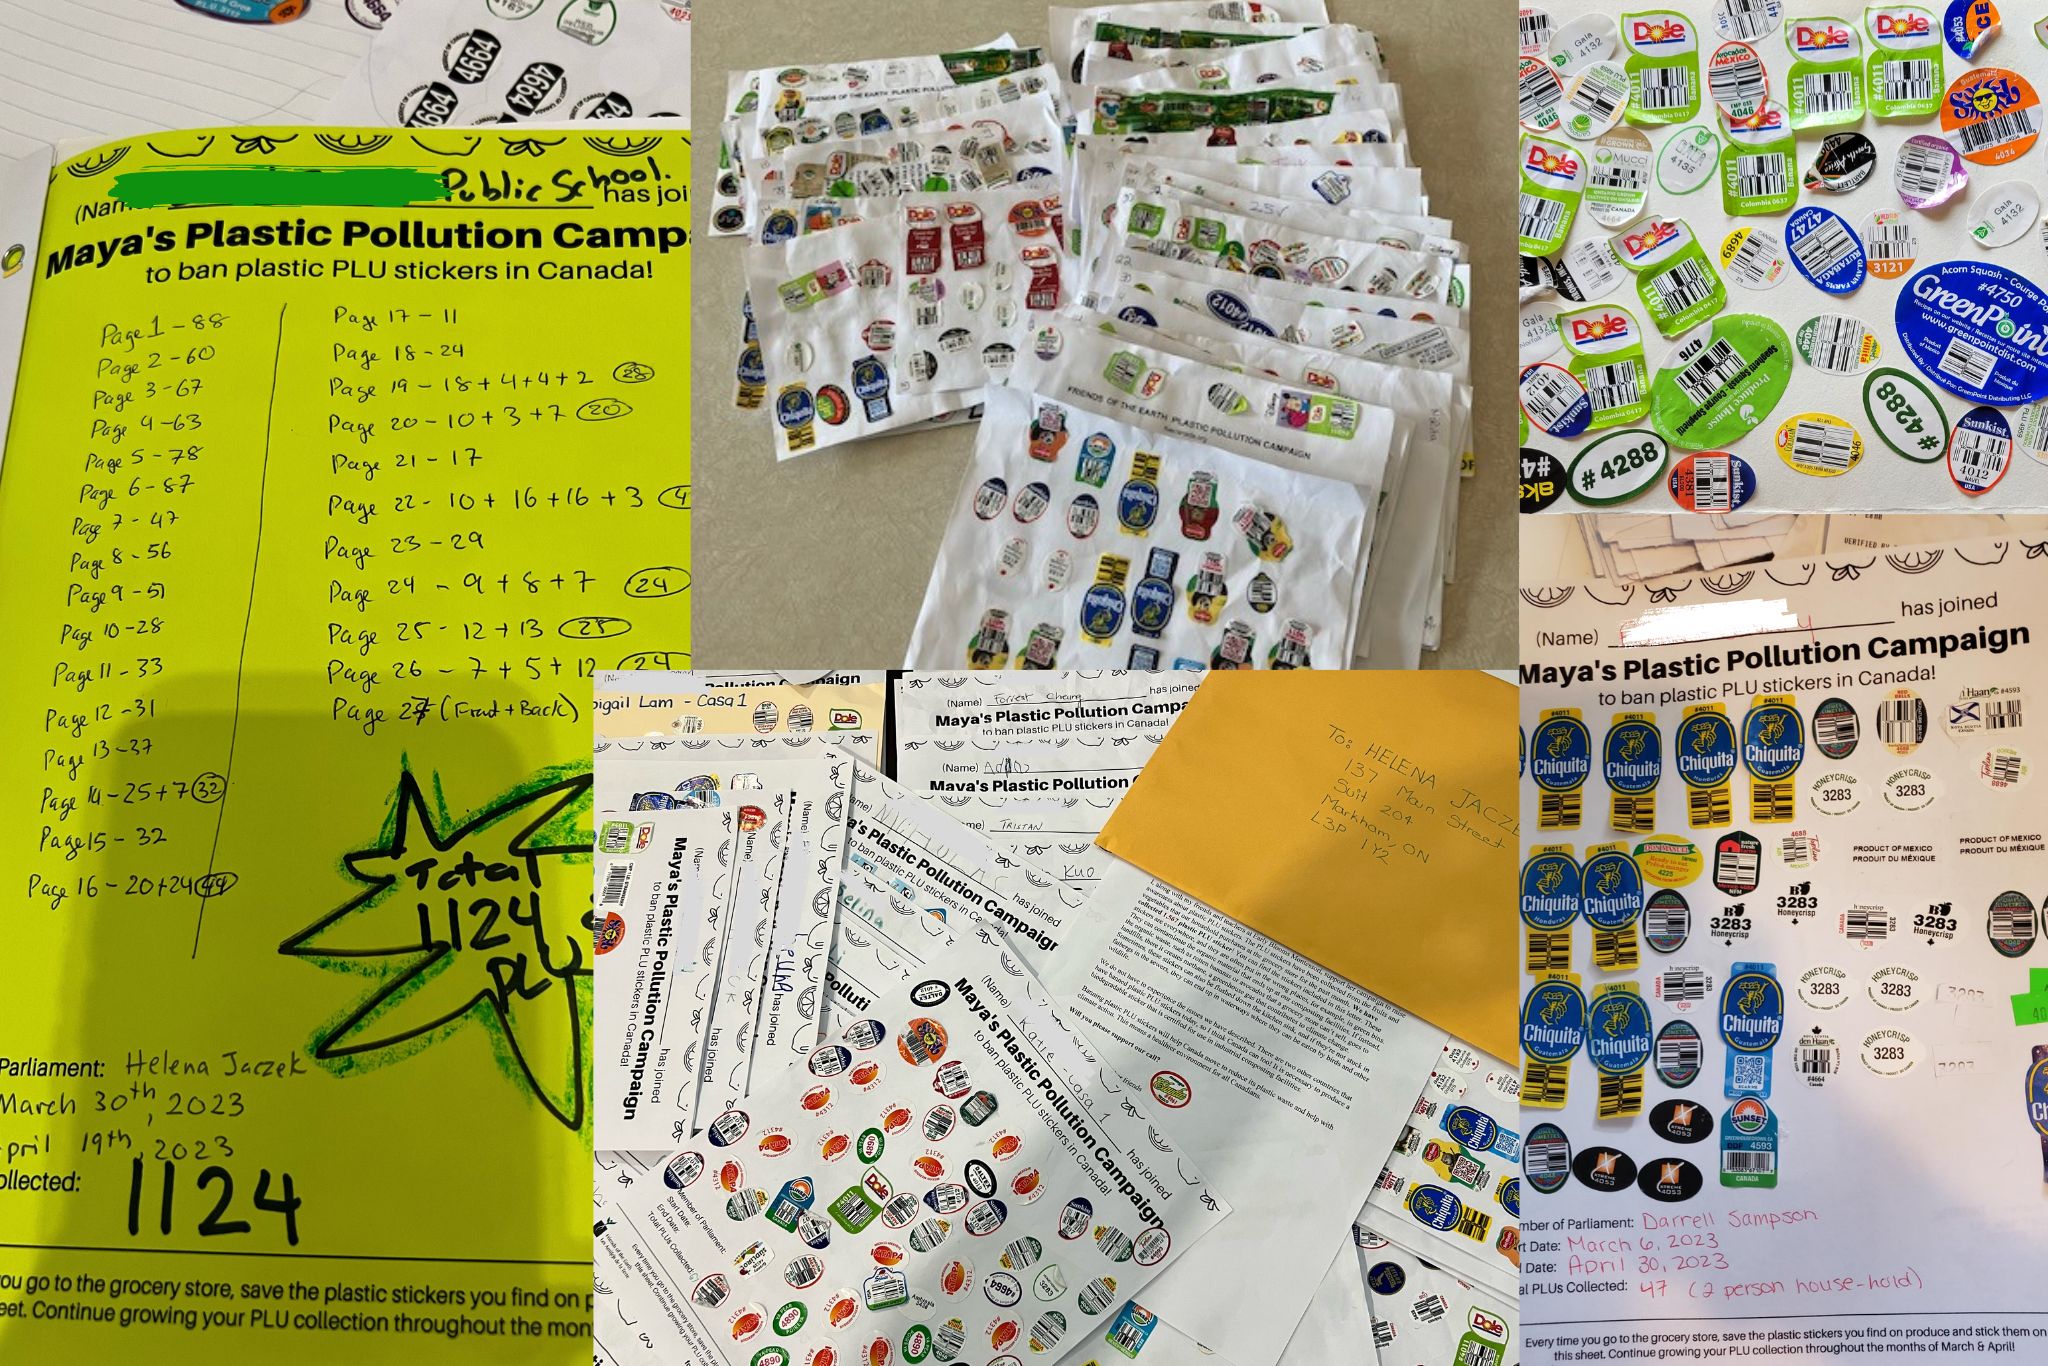 Images of PLU stickers collected during the campaign.